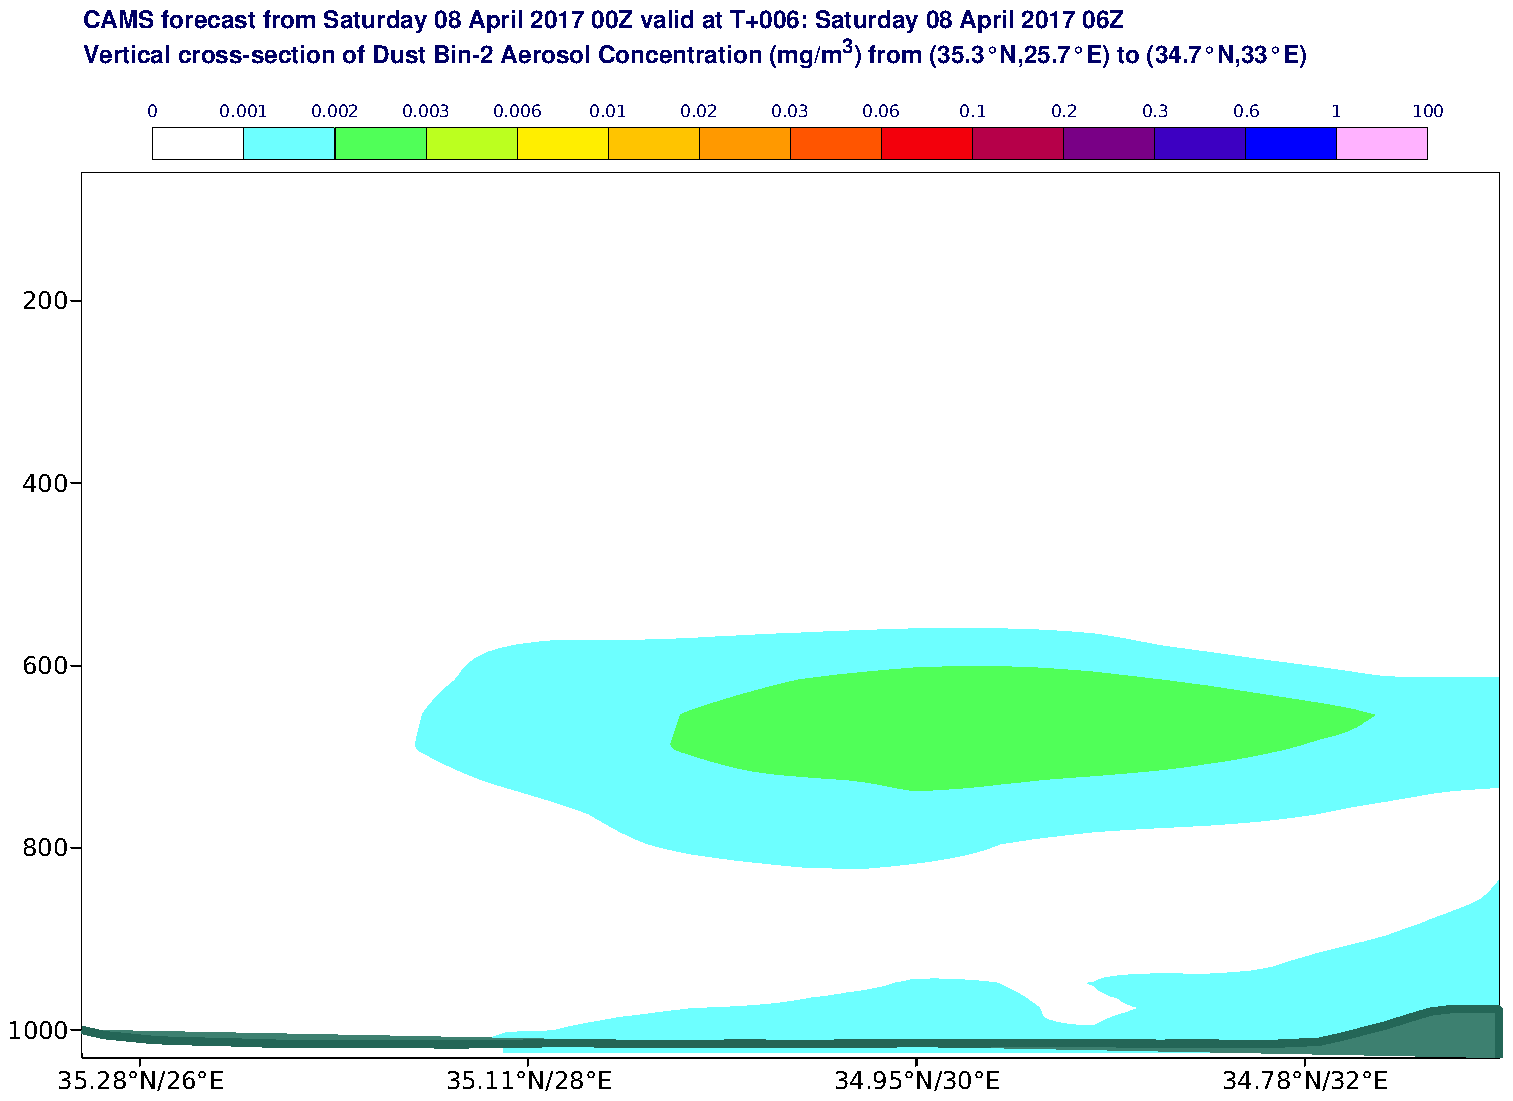 Vertical cross-section of Dust Bin-2 Aerosol Concentration (mg/m3) valid at T6 - 2017-04-08 06:00